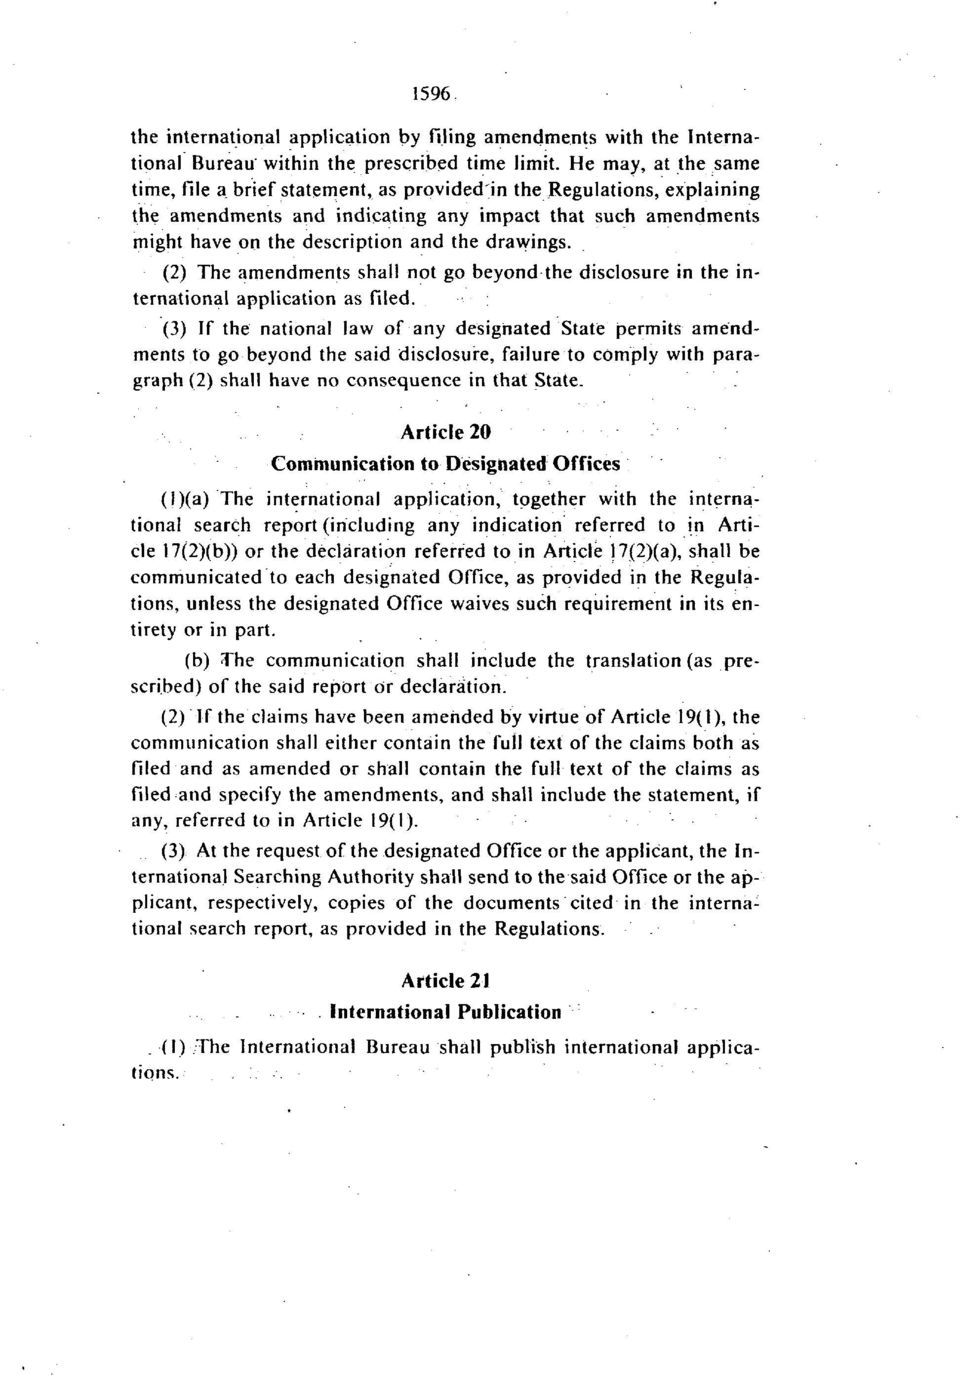 drawings. (2) The amendments shall not go beyond the disclosure in the international application as filed.